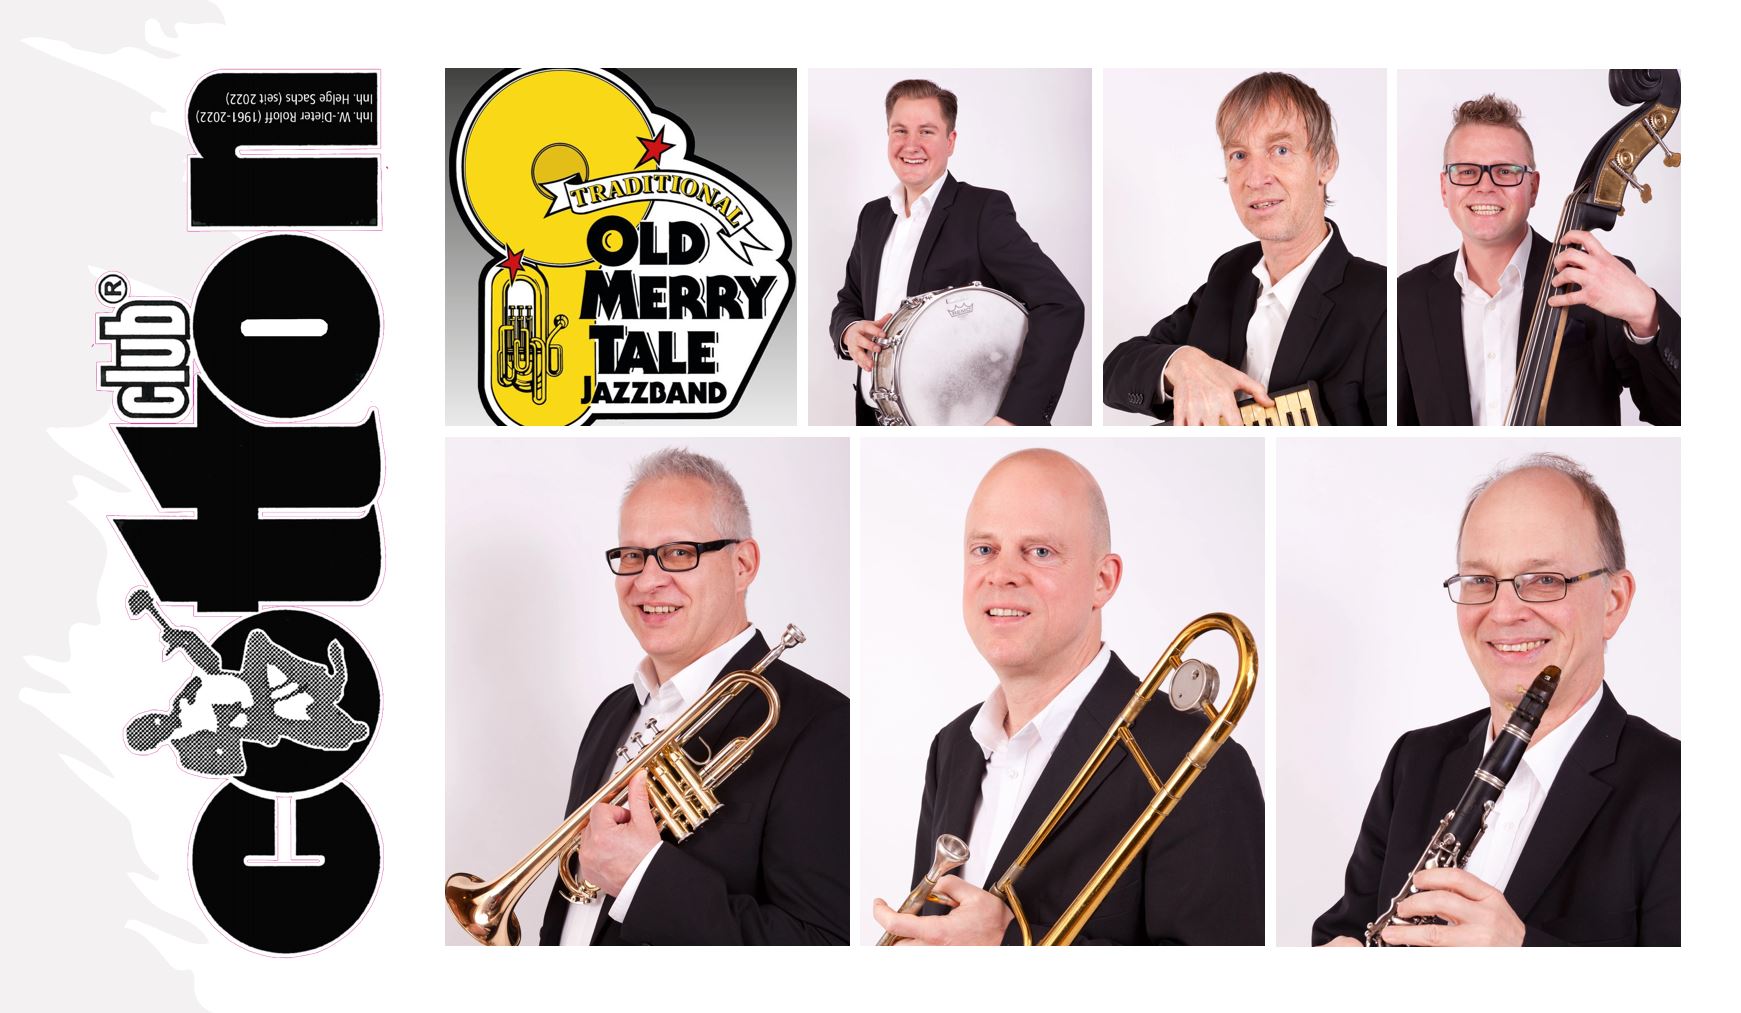 TRADITIONAL OLD MERRY TALE JAZZBAND